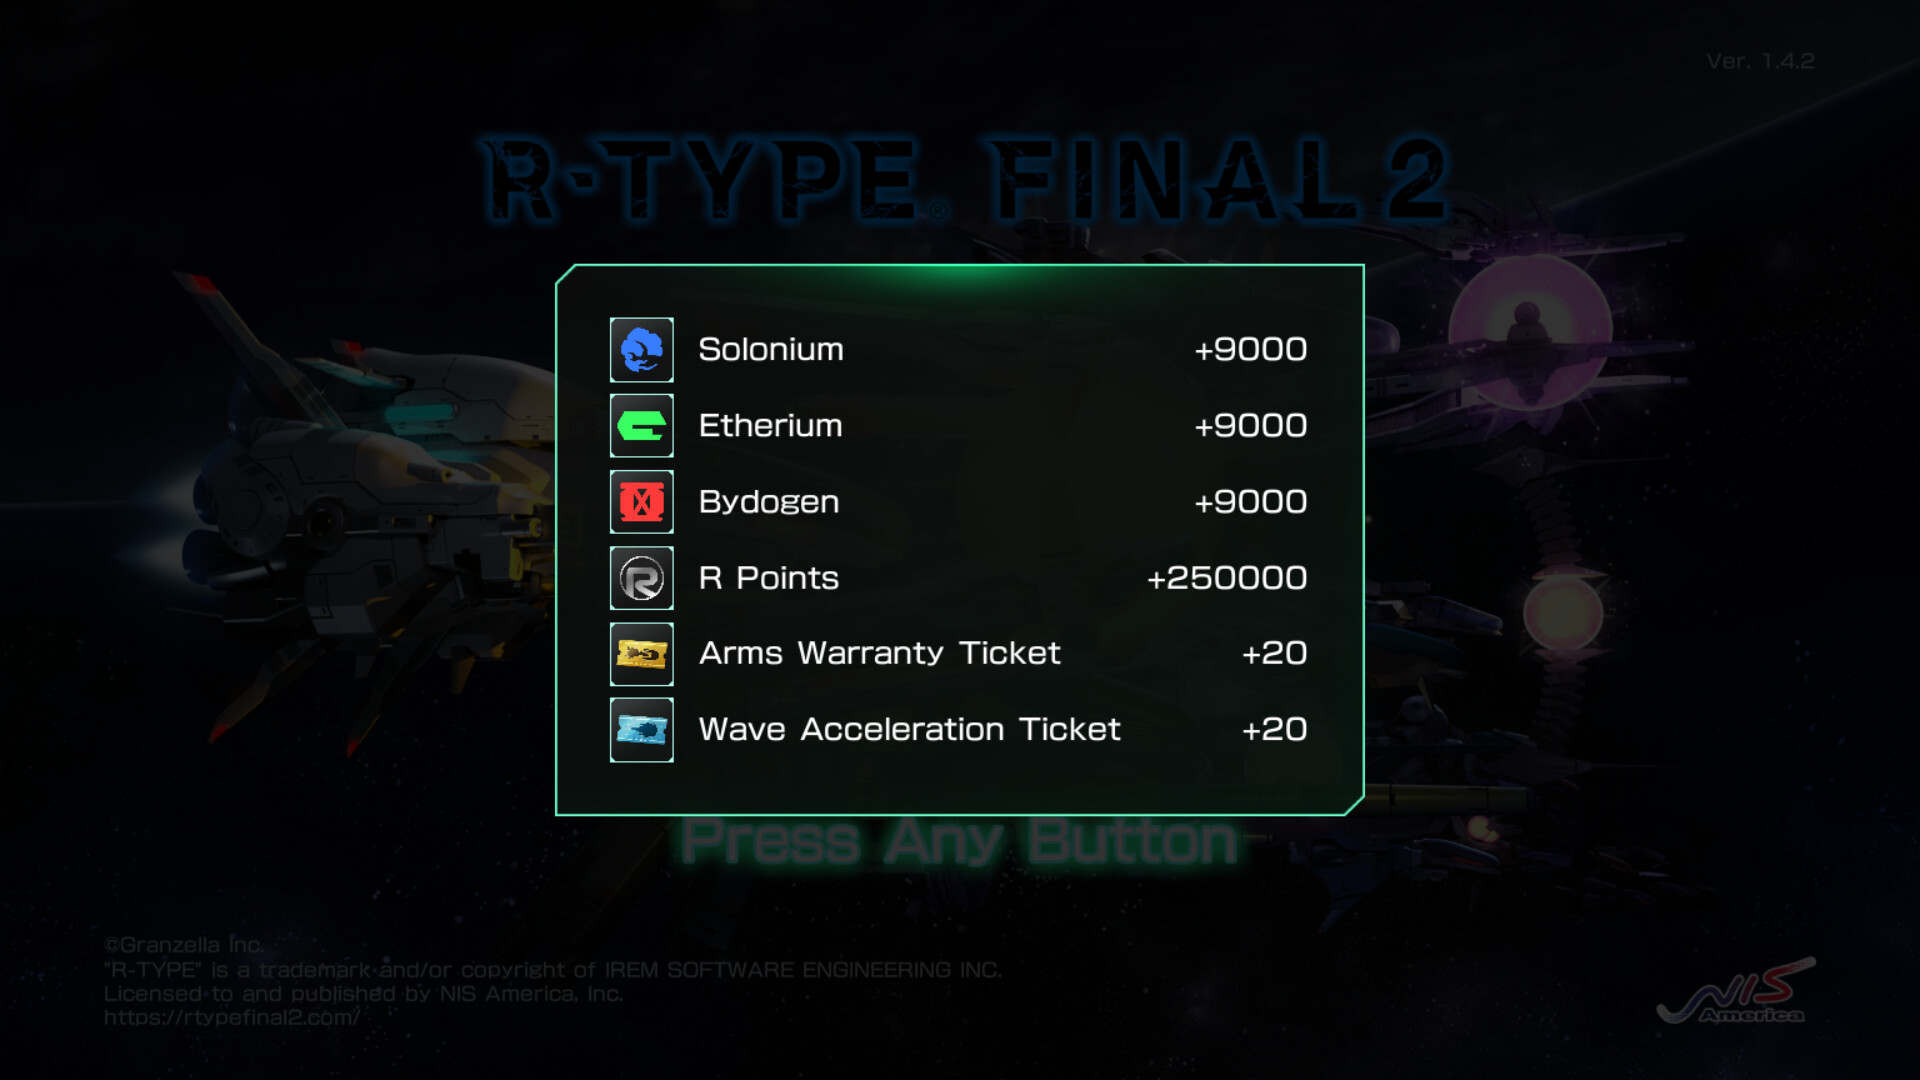 R-Type Final 2 - Ace Pilot Special Training Pack III DLC Steam CD Key [USD 5.64]